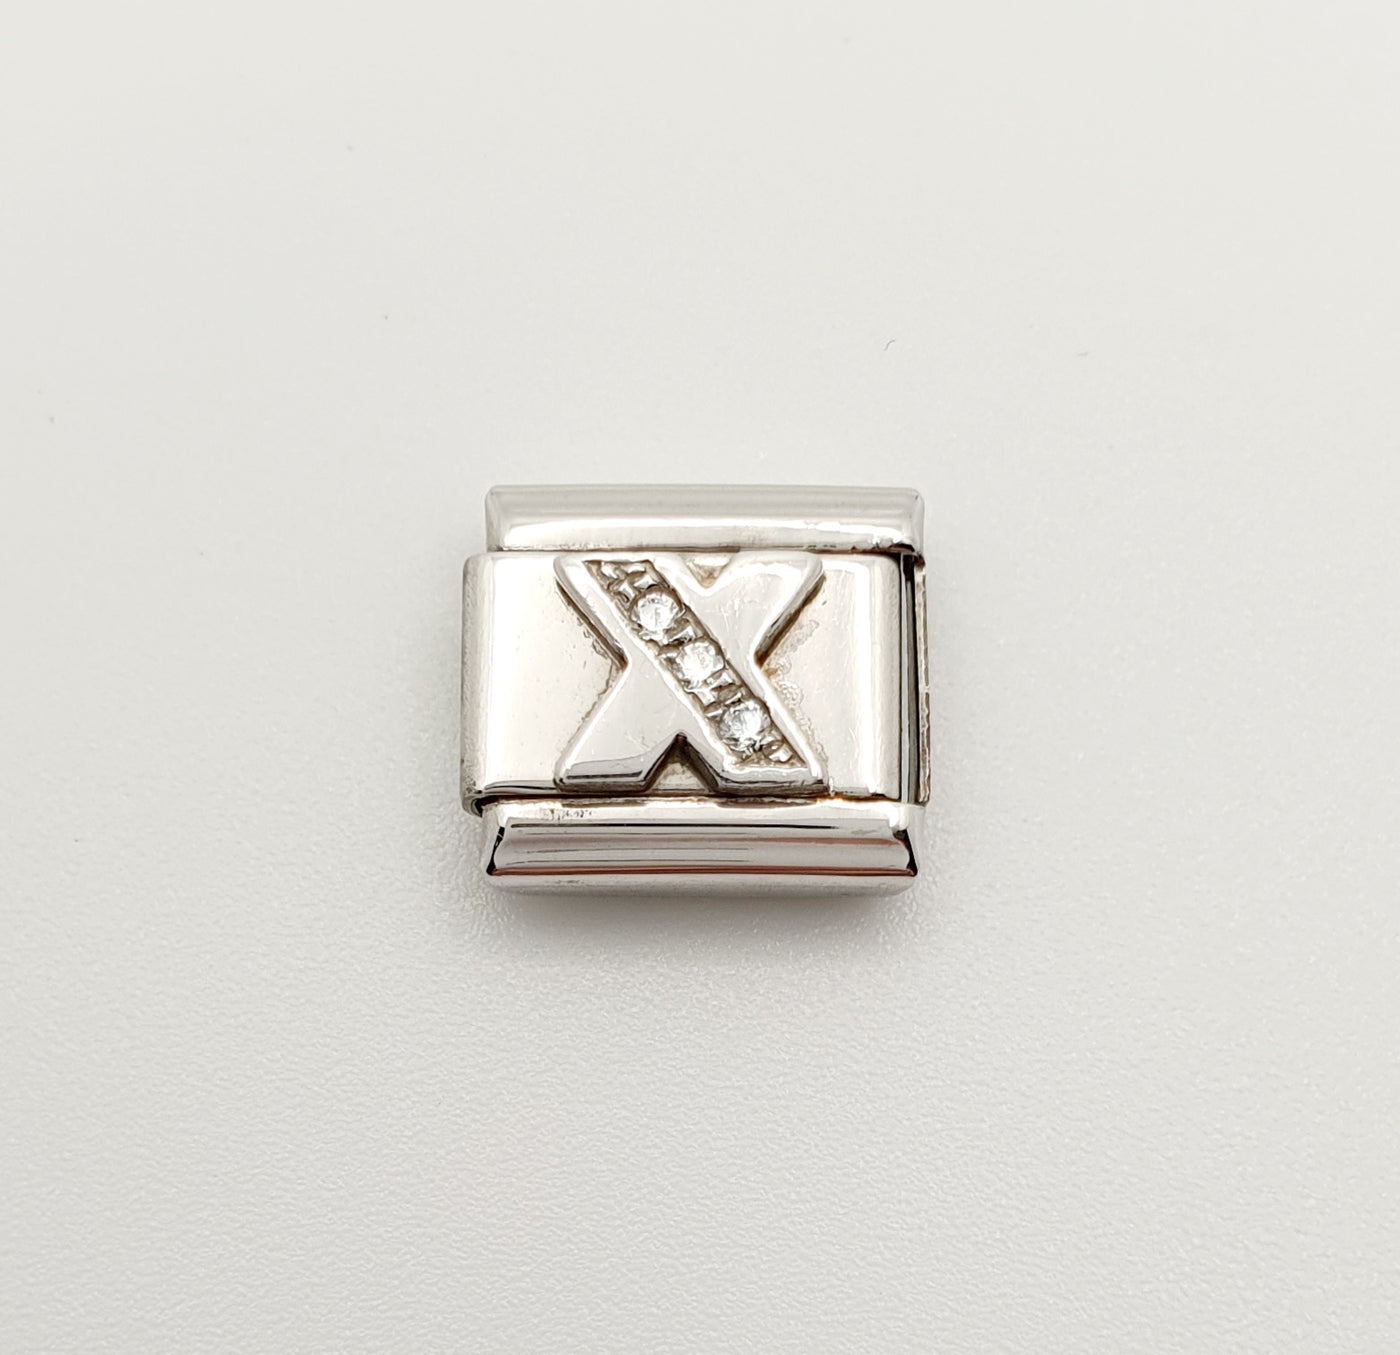 Nomination Charm Link "X" Stainless Steel with CZ's & 925 Silver, 330301 24